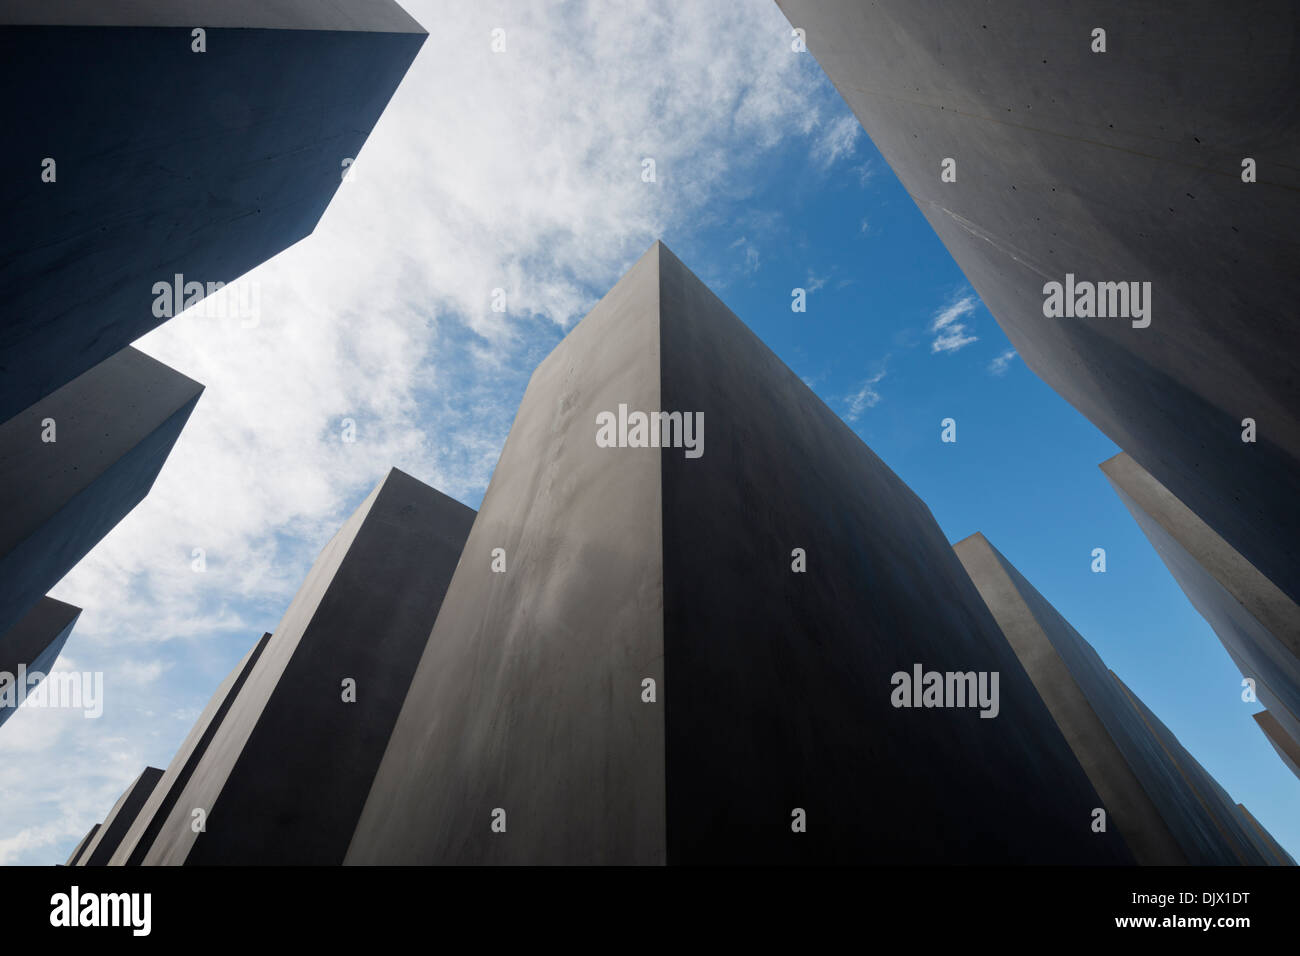 Abstract view of towering concrete slabs at the Holocaust Memorial in Berlin, Germany, Europe. Stock Photo